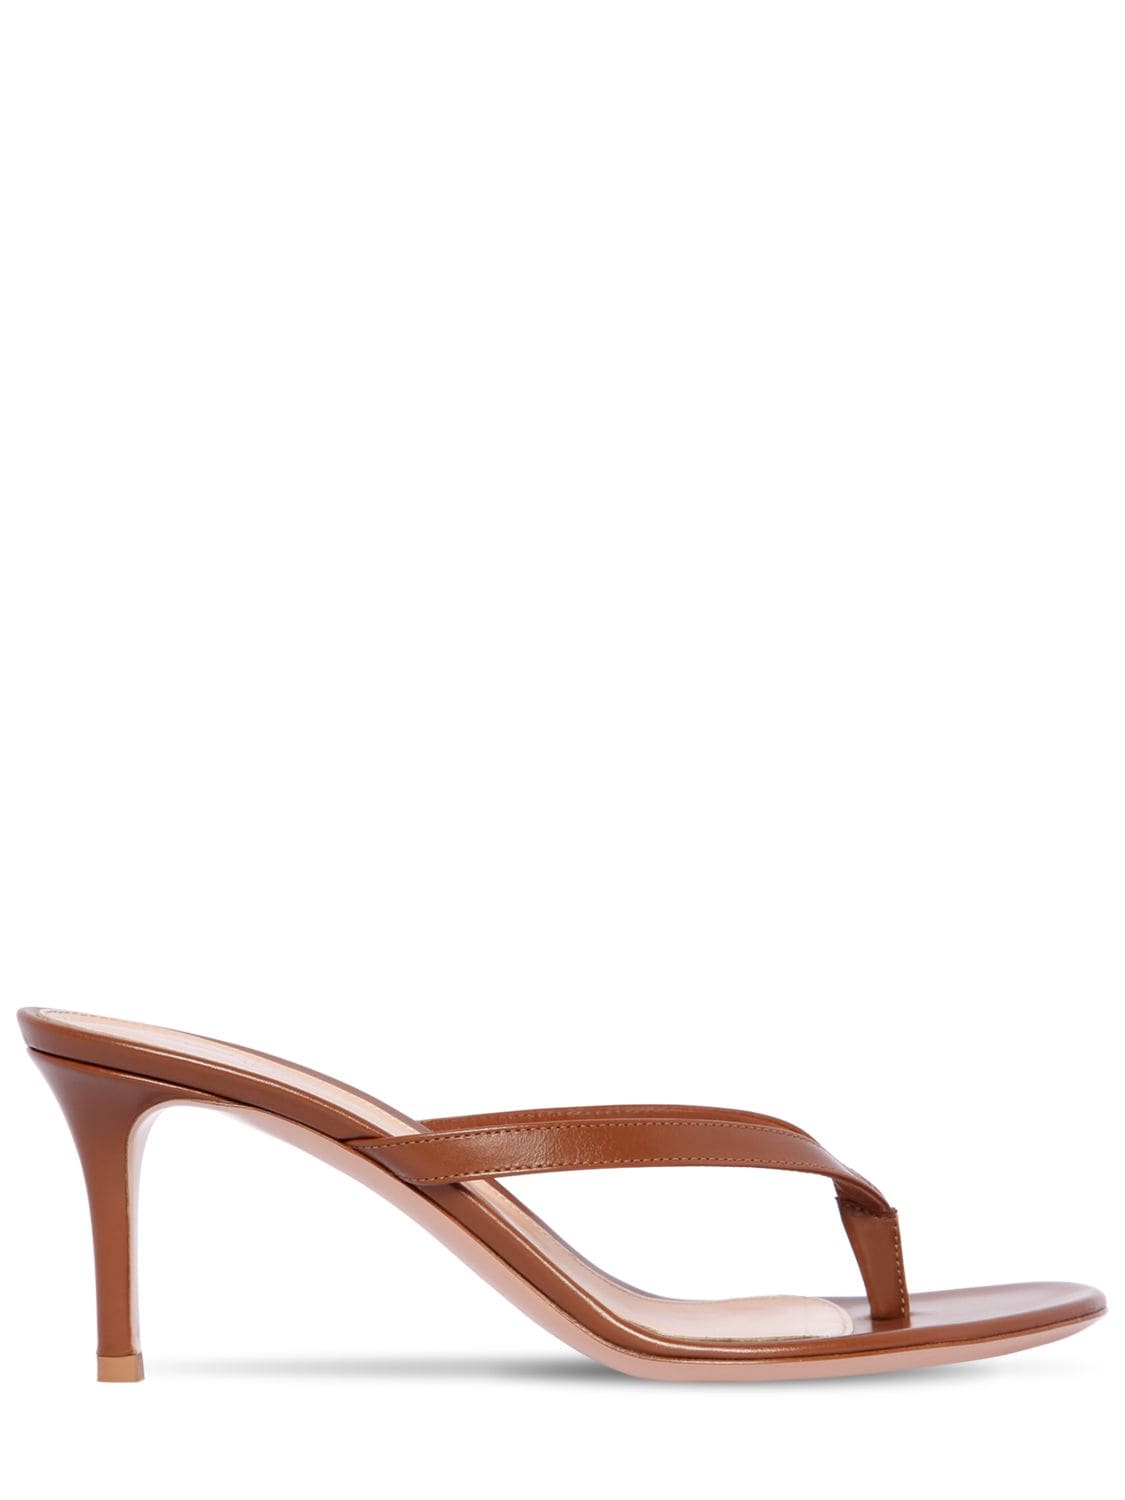 Gianvito Rossi Thong Leather Slide Sandals In Light Brown | ModeSens